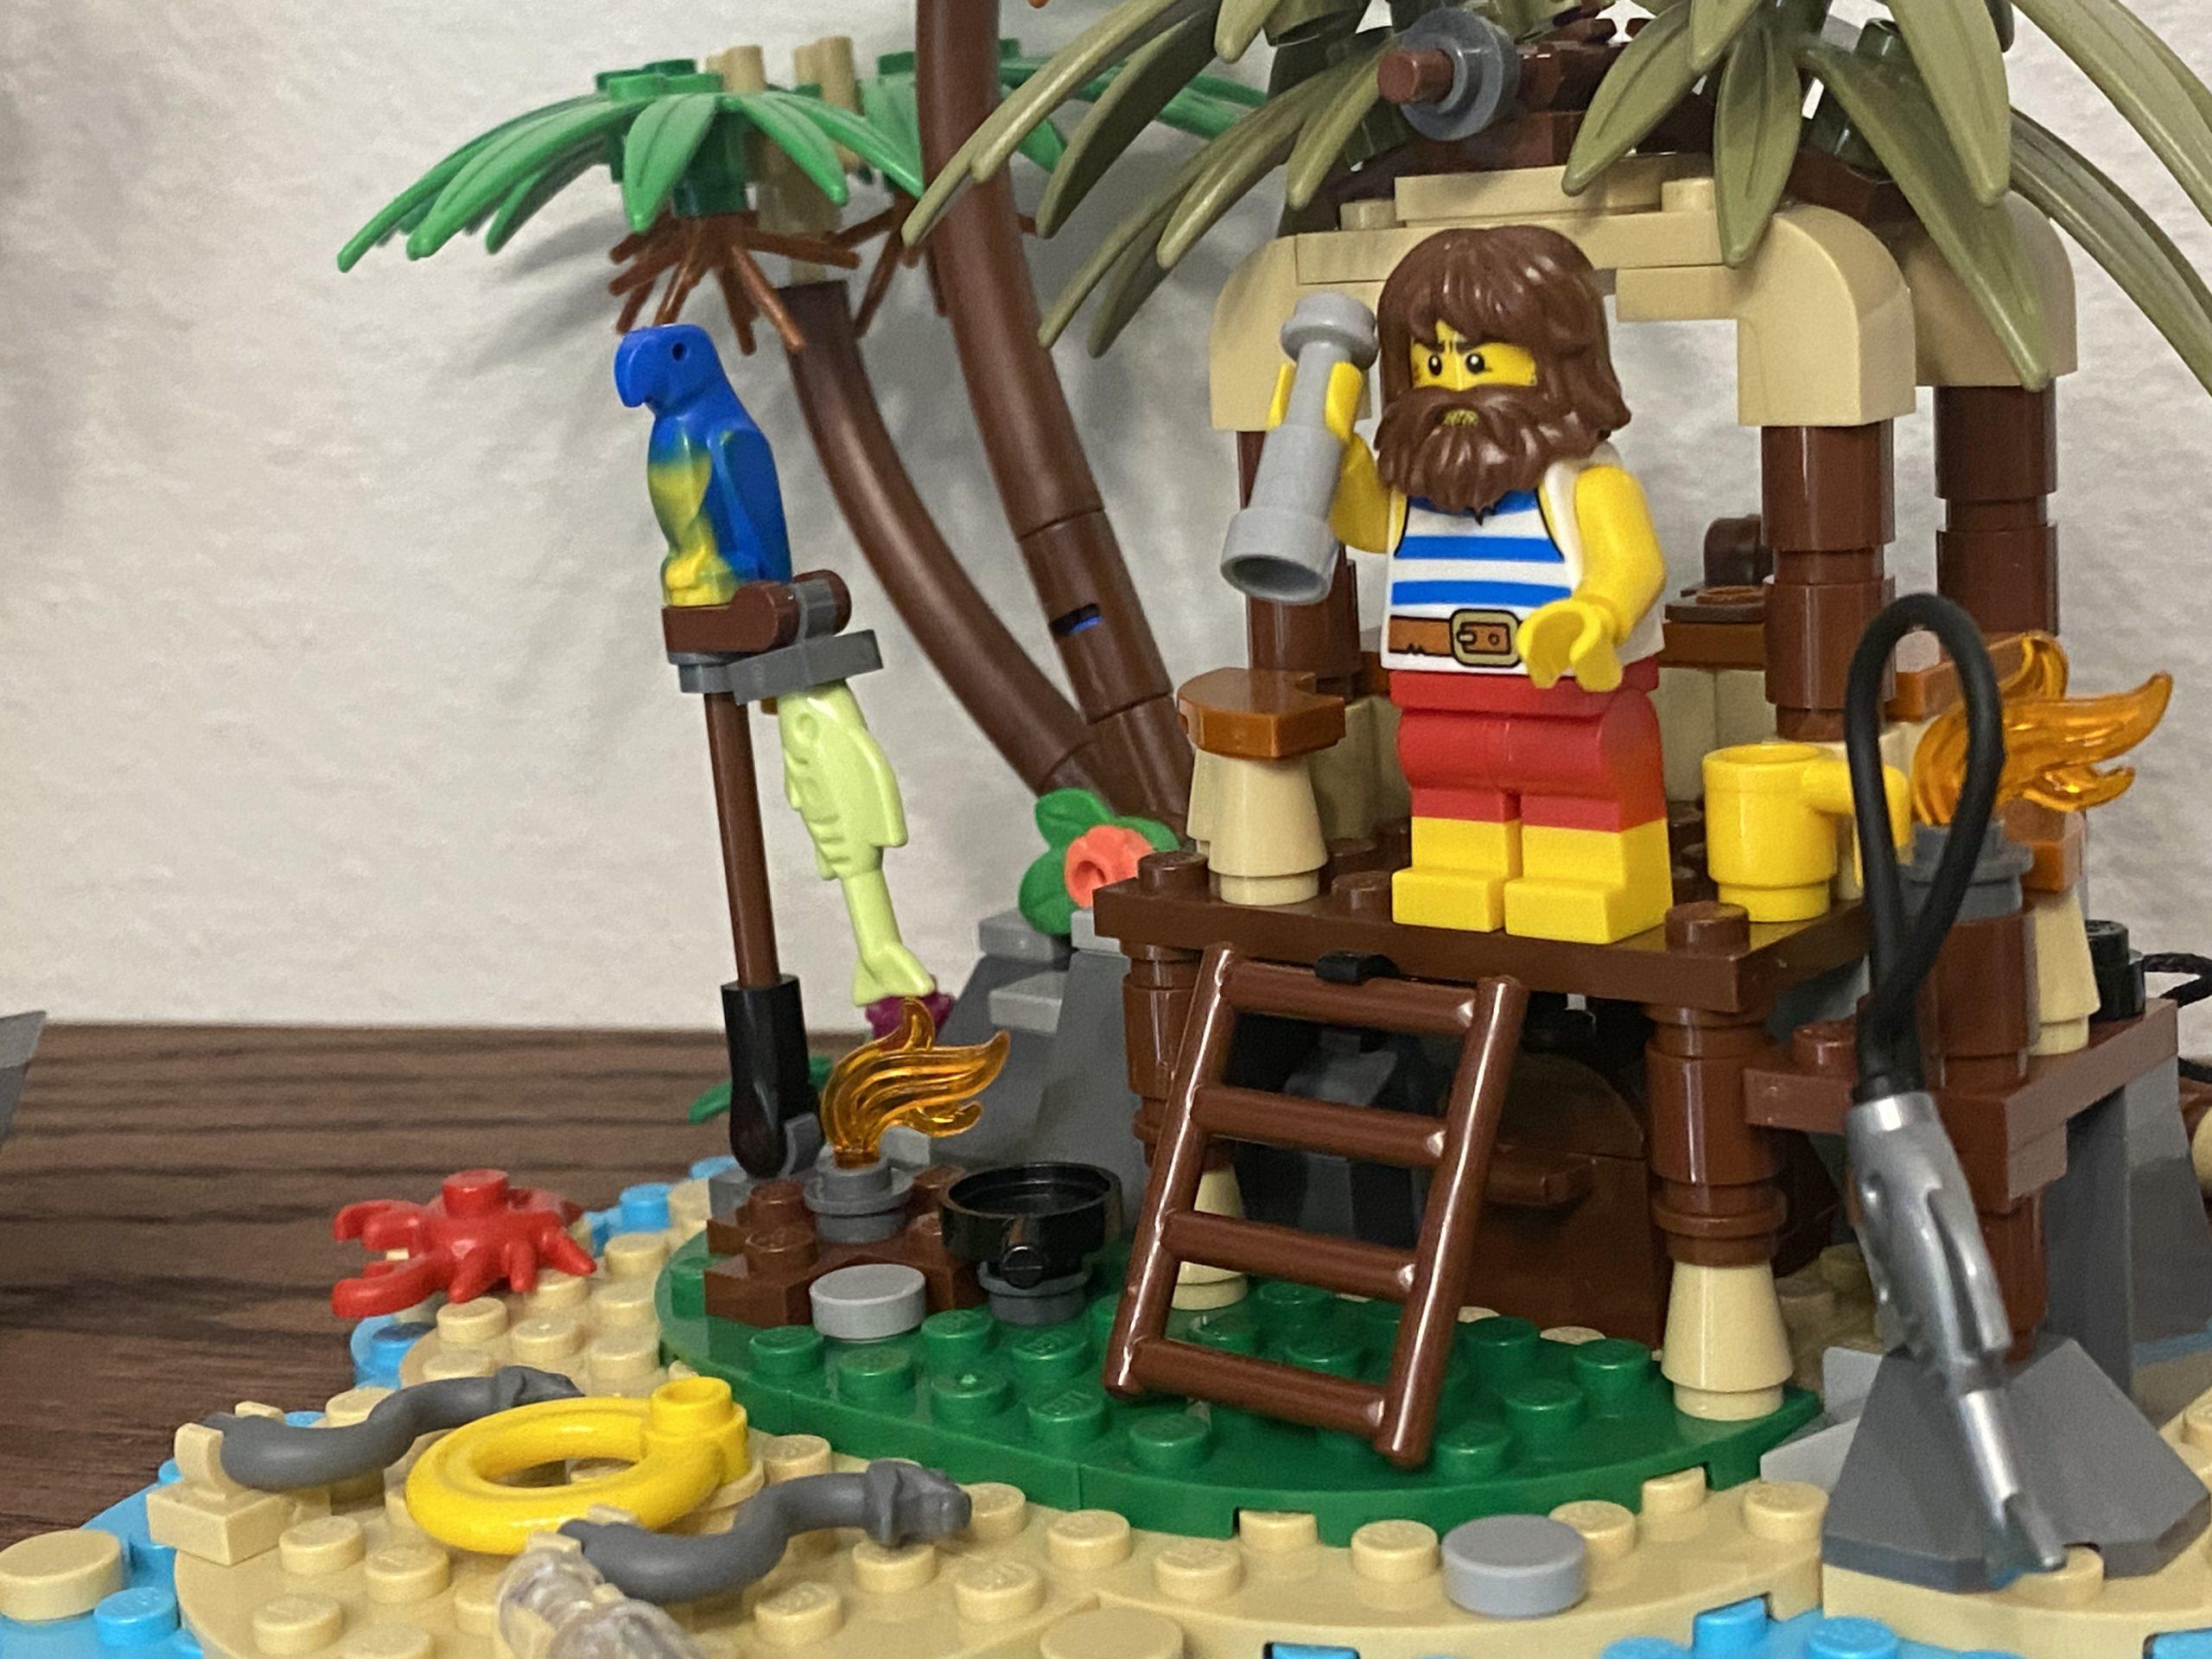 A Lego island with a castaway standing on a platform under trees. There is a parrot sitting on a perch, a fishing pole with a fish, and snakes on the beach by the water.